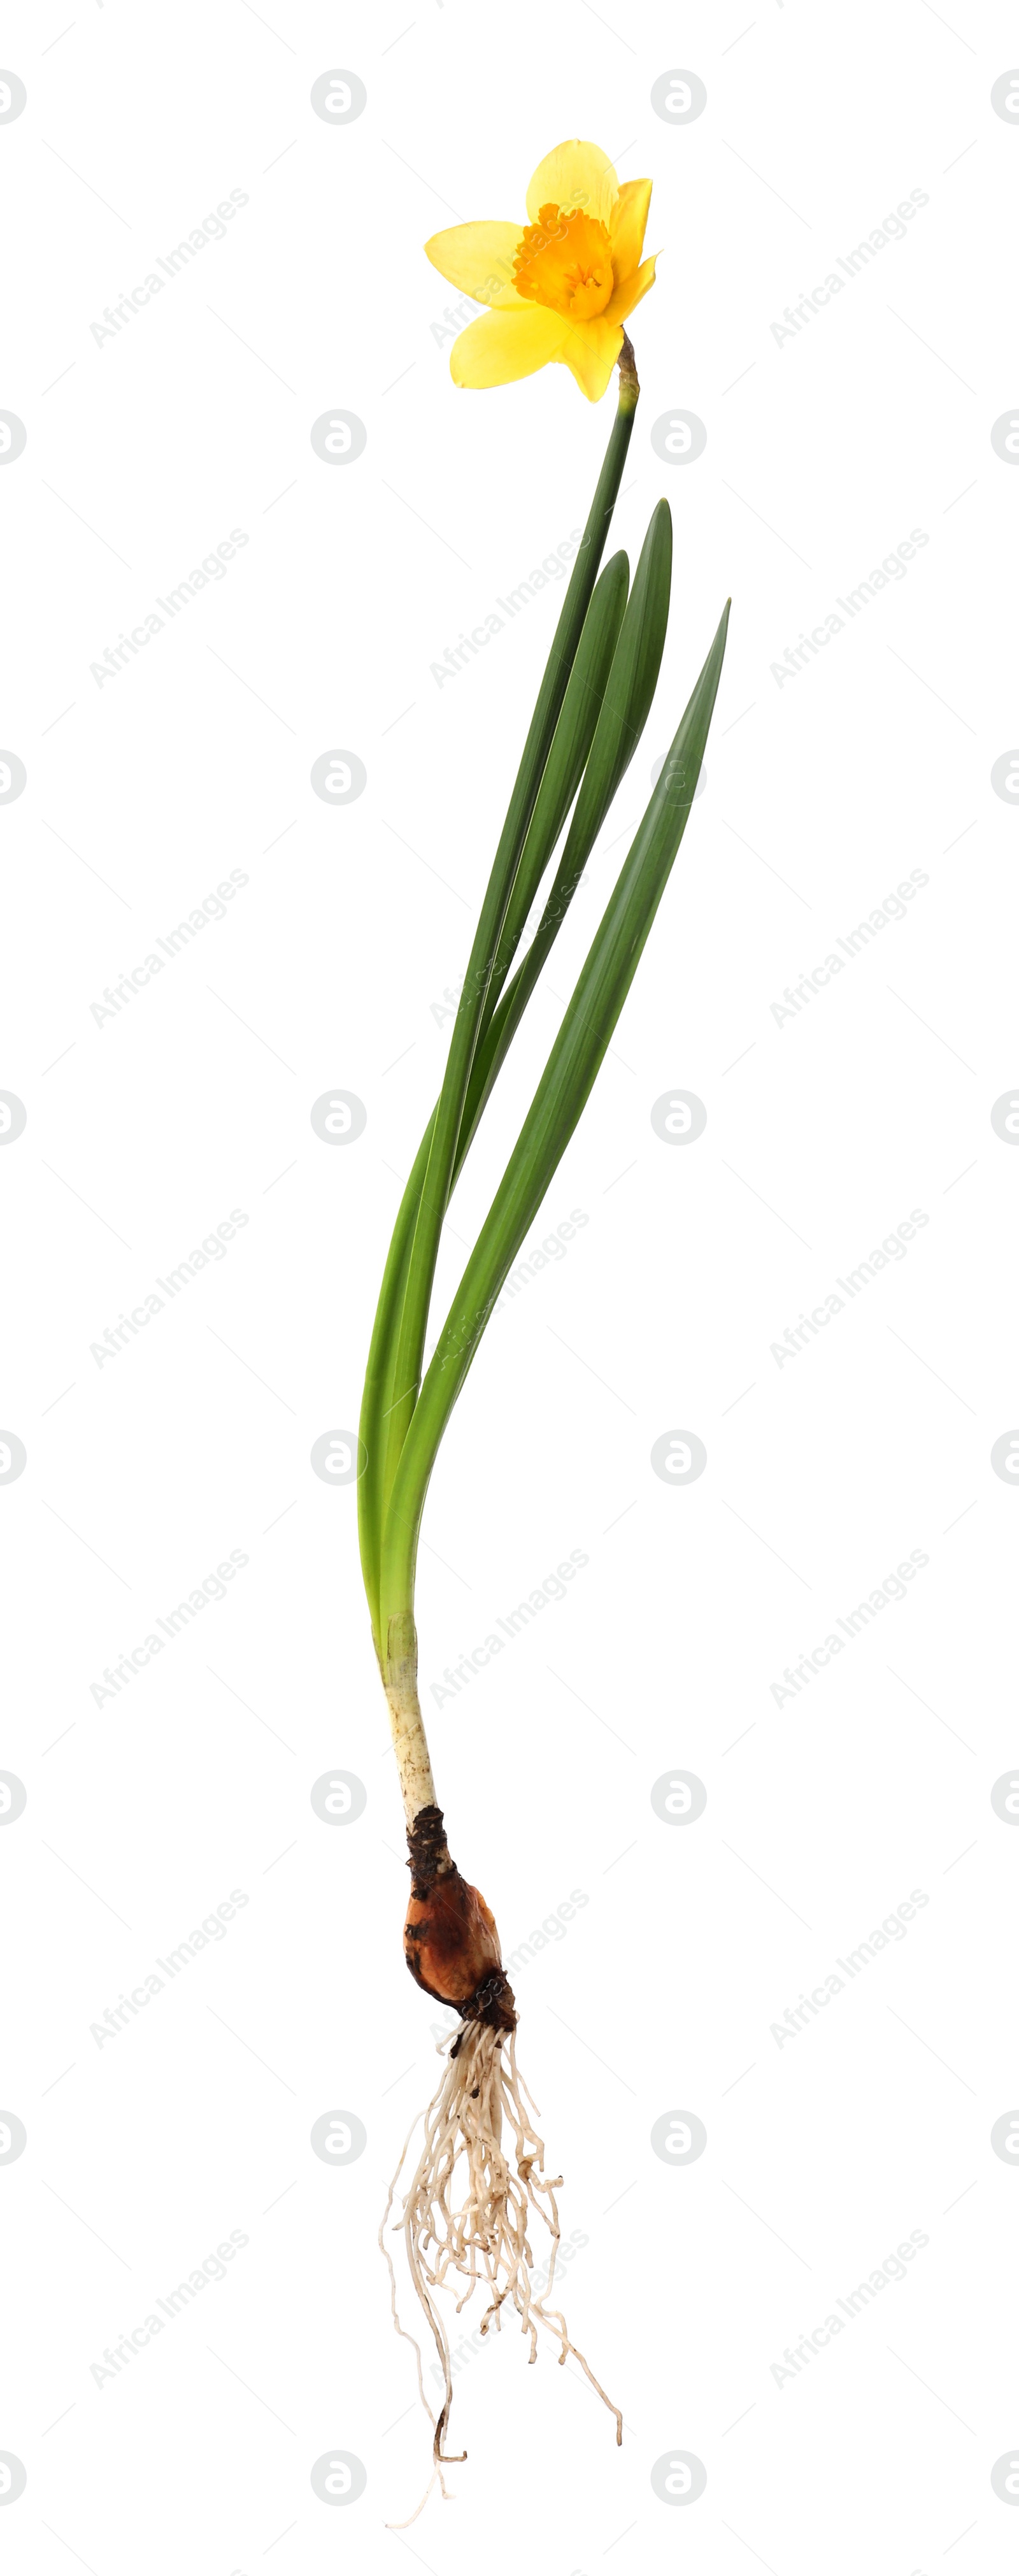 Photo of Blooming yellow daffodil with bulb isolated on white